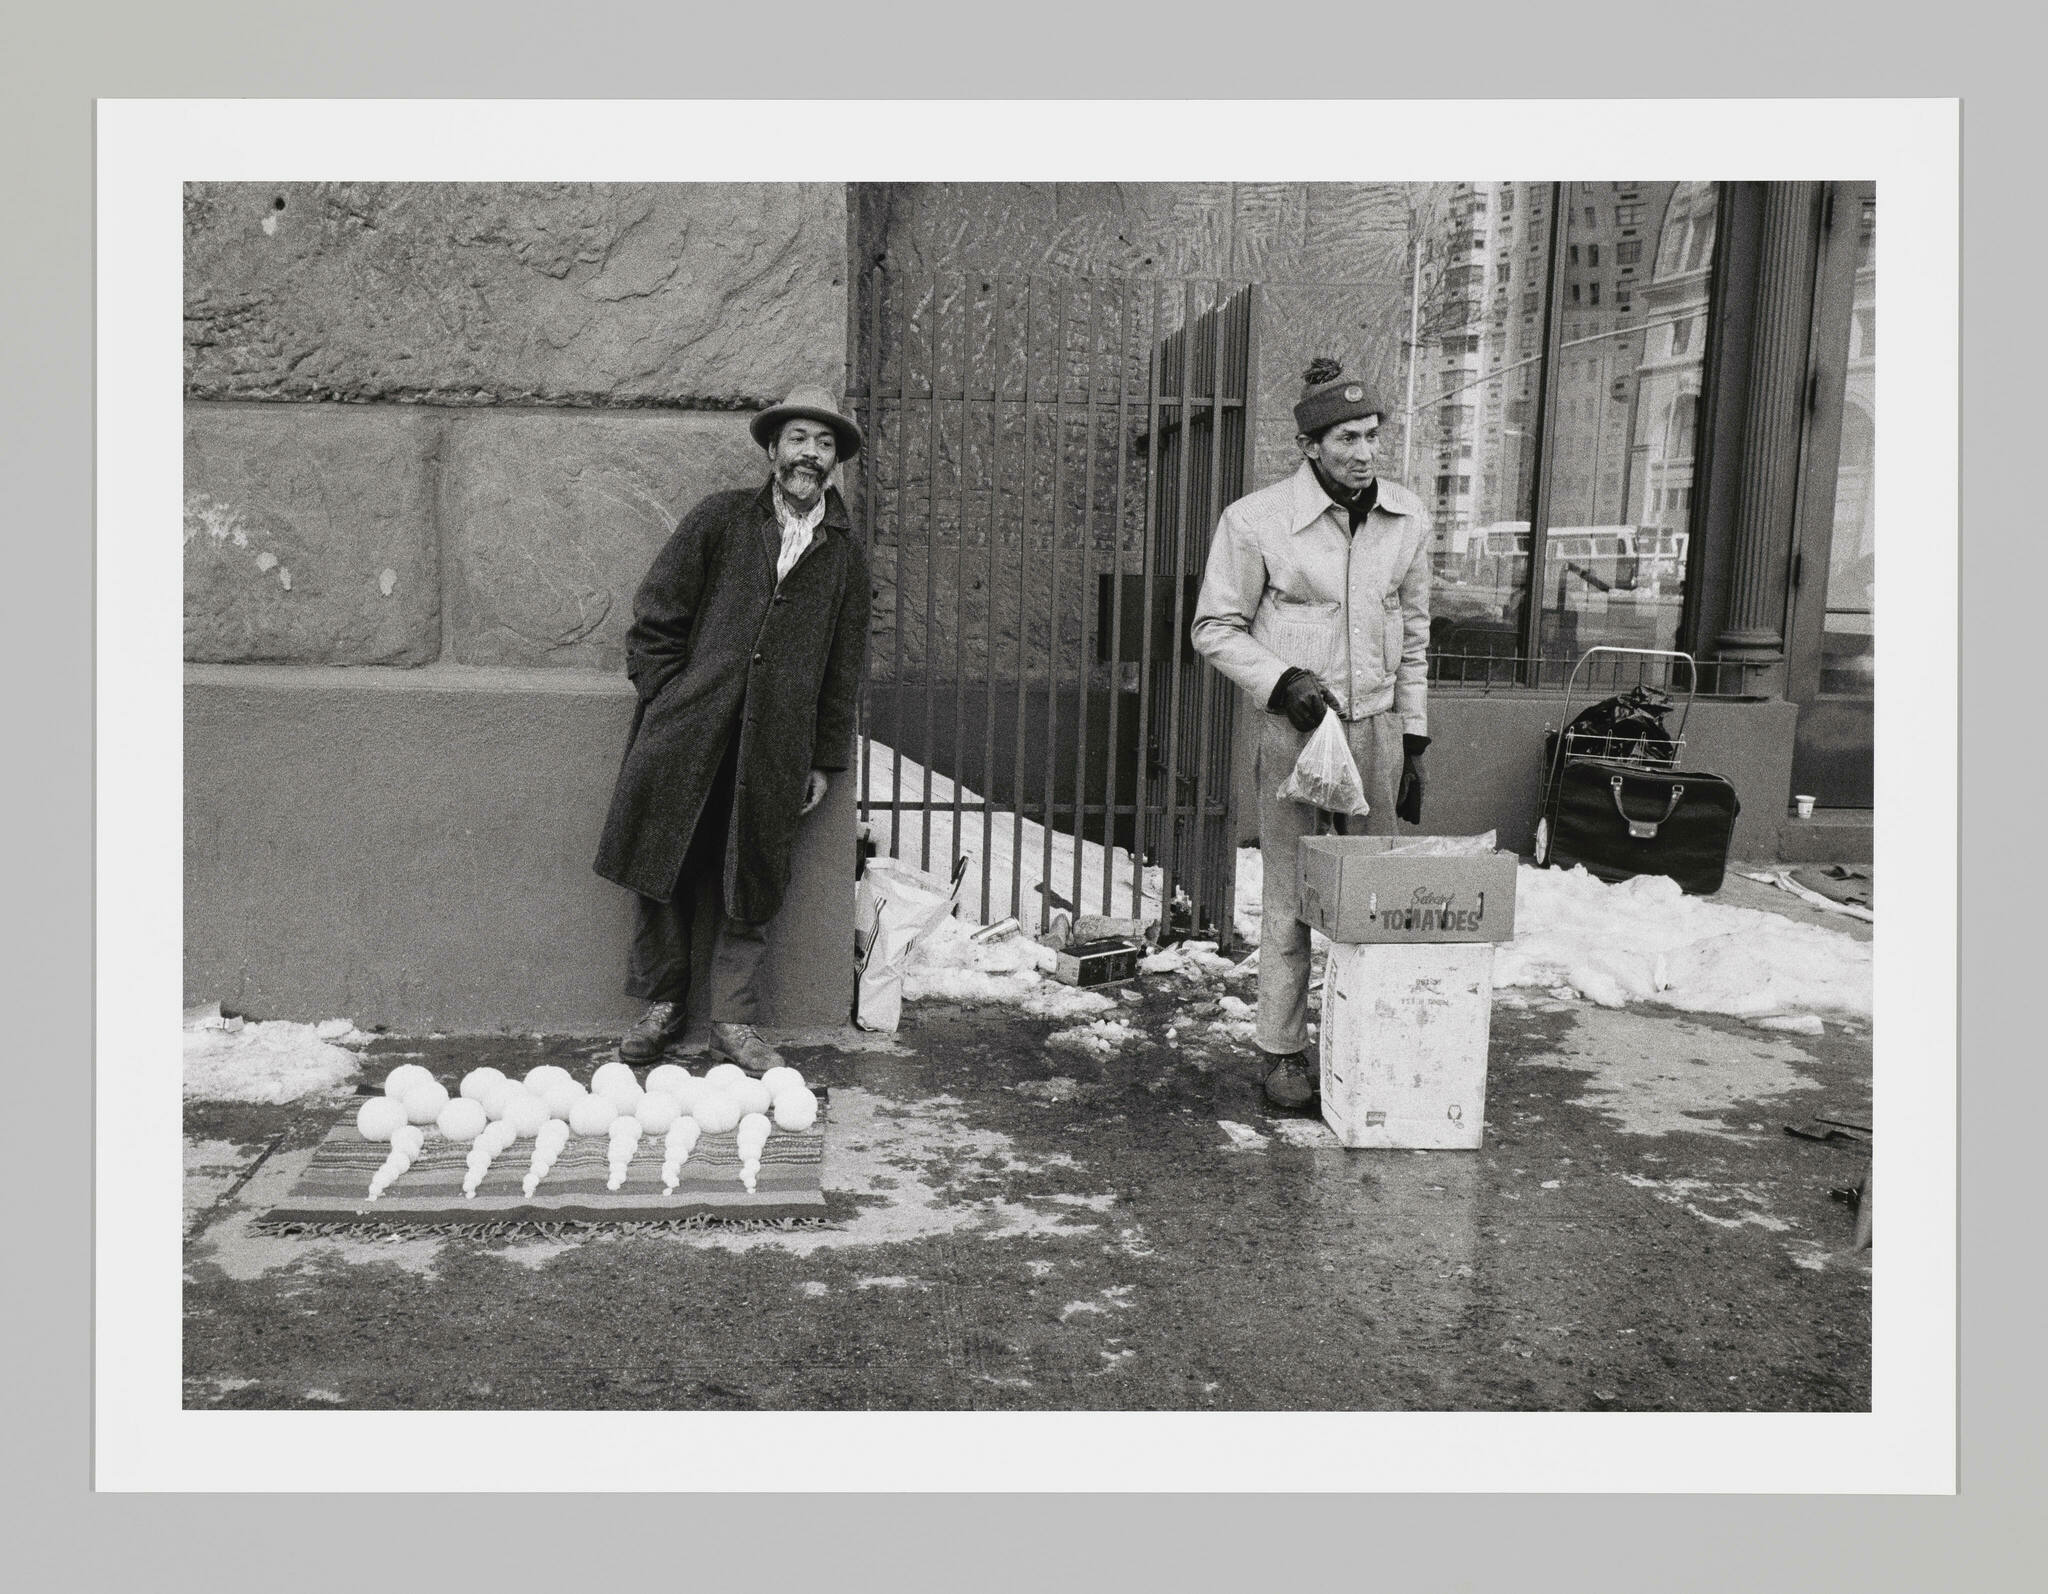 Two men stand on a snowy sidewalk selling items. The man on the left, artist David Hammons, sells differently sized snowballs.